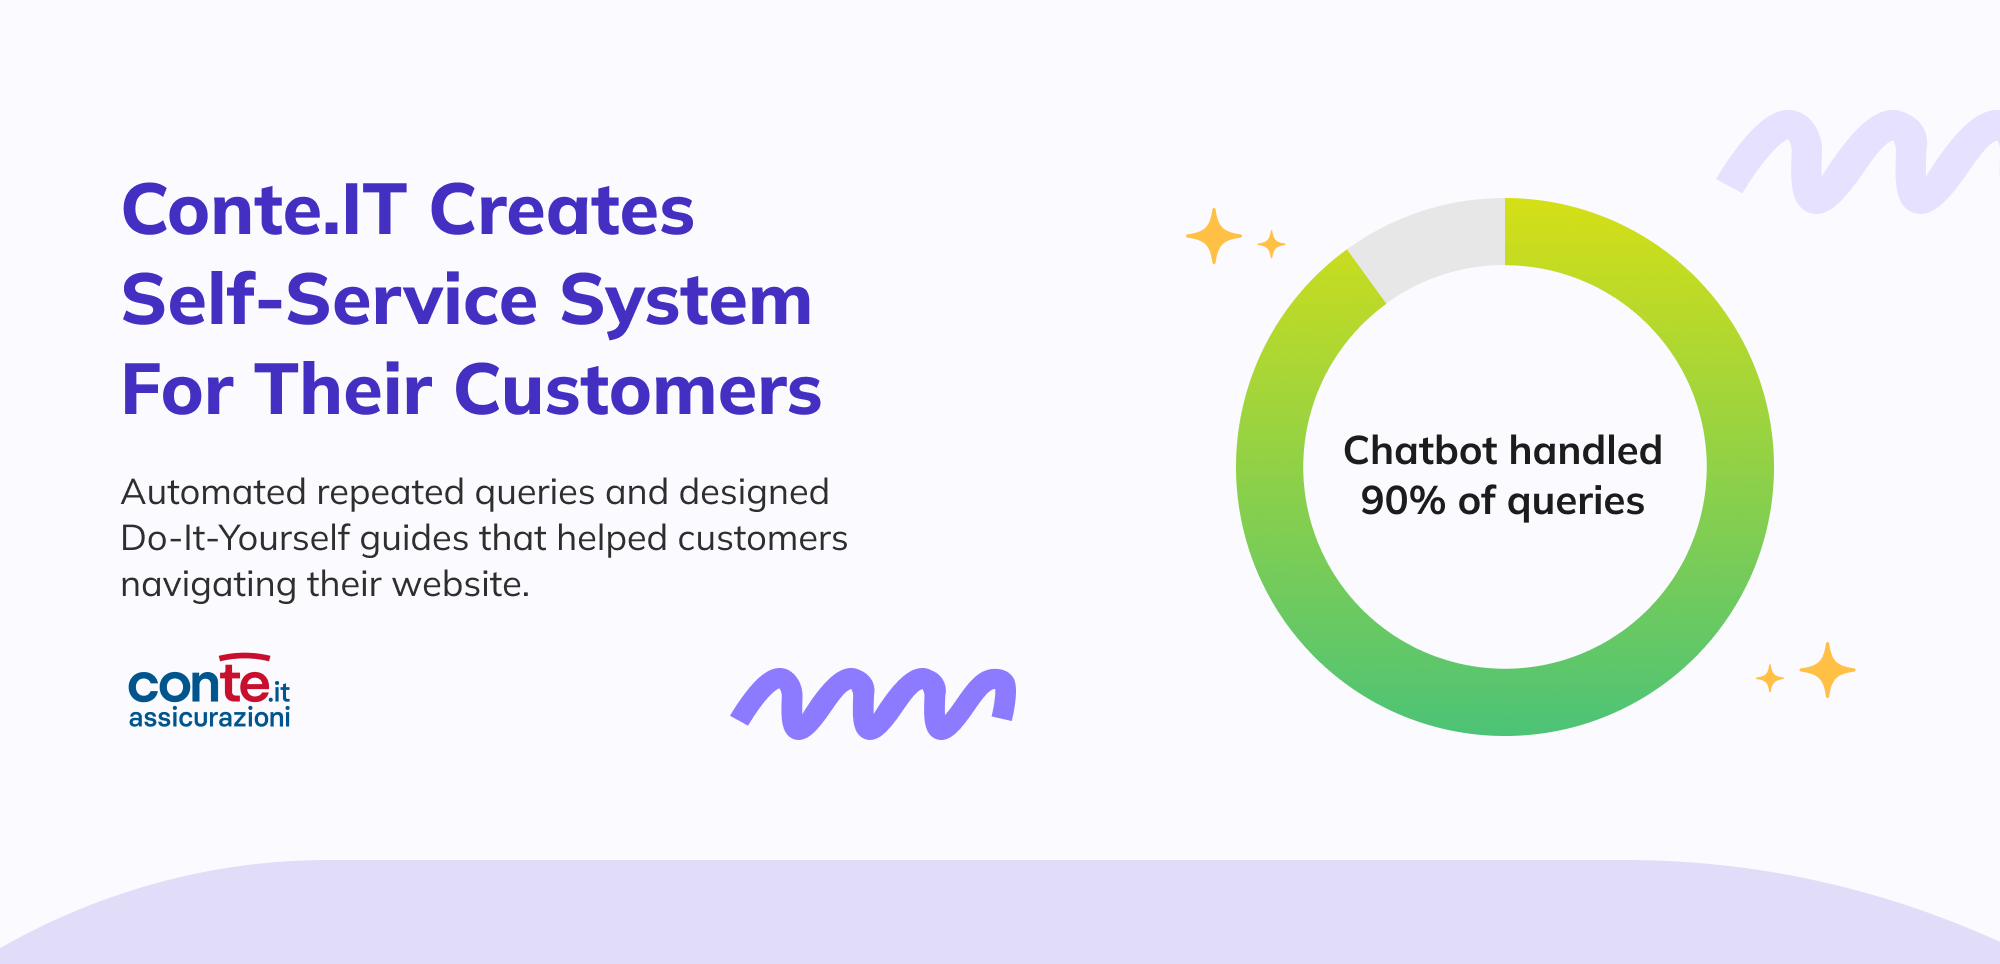 Infographic highlighting Conte.IT's creation of a self-service system for customers. It shows a circular chart indicating that chatbots handled 90% of queries. The graphic explains how Conte.IT automated repeated queries and designed DIY guides to help customers navigate their website. The image uses a purple and white color scheme with green accents.